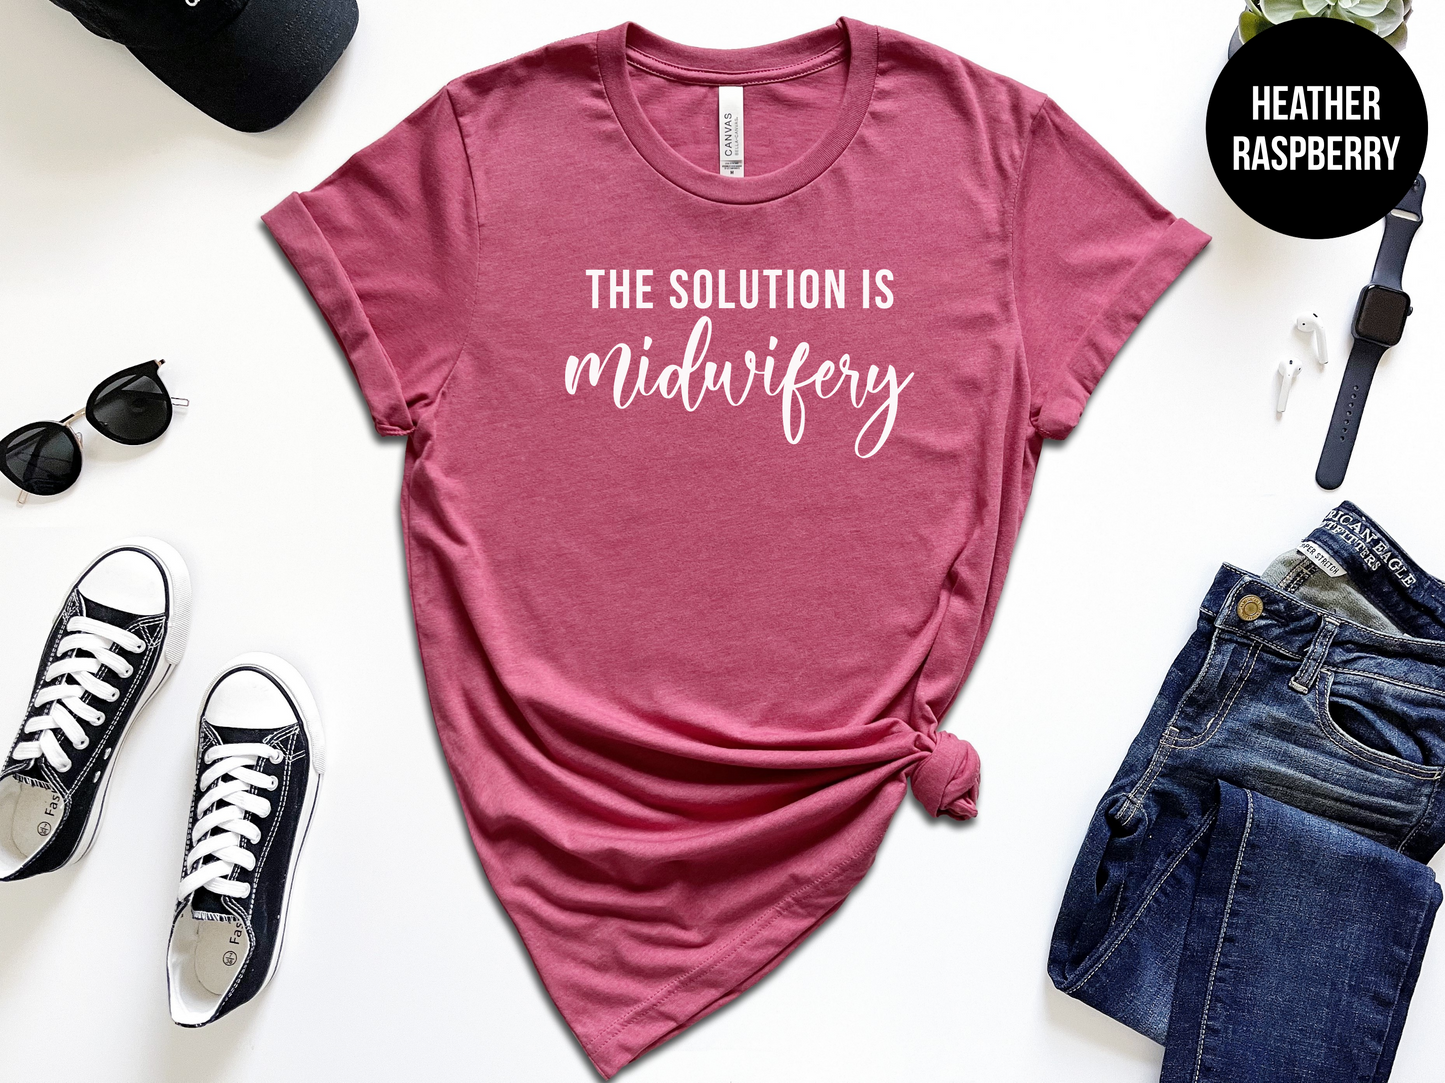 The Solution is Midwifery